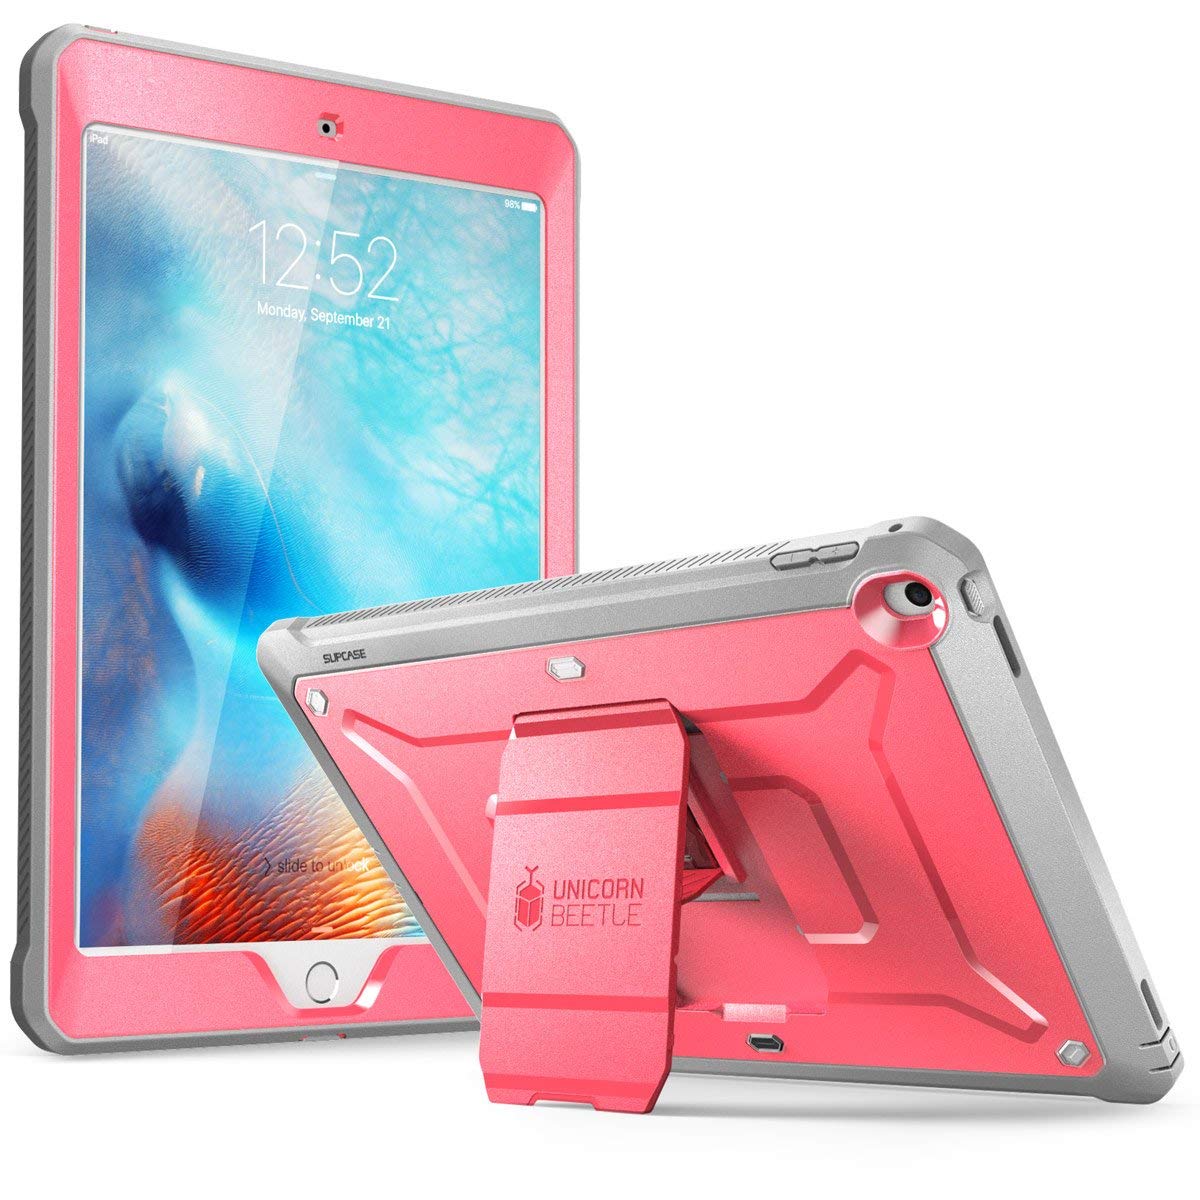 SUPCASE Ipad 9.7 Case 2018 / 2017, Heavy Duty [Unicorn Beetle Pro Series] Full-Body Rugged Protective Case with Built-In Screen Protector Dual Layer Design for Ipad 9.7 Inch 2017 / 2018 (Pink)